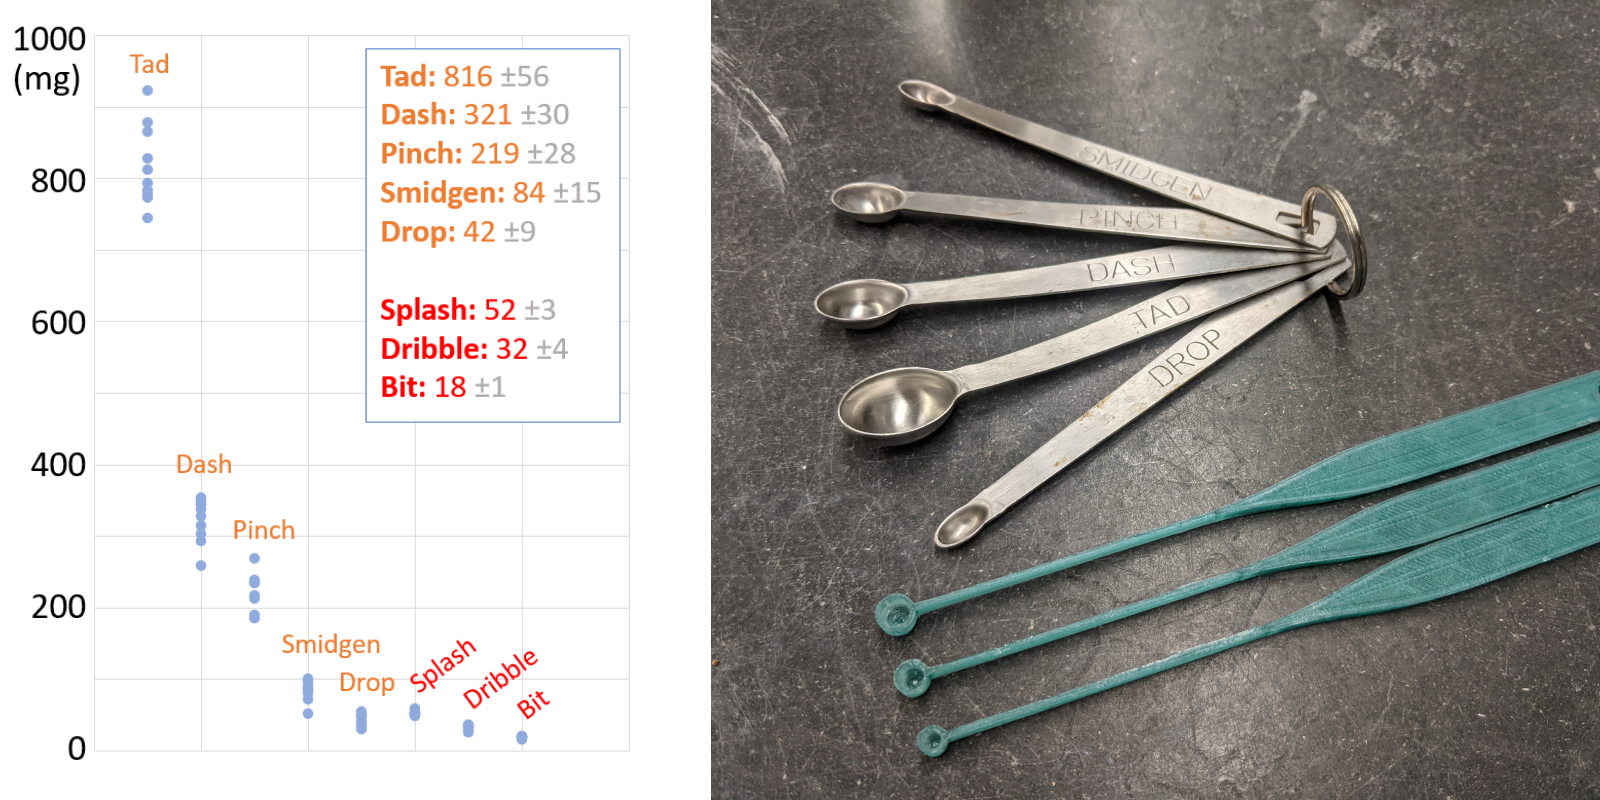 The spoons are specialized to extend the measuring range below the limits of common measuring spoons